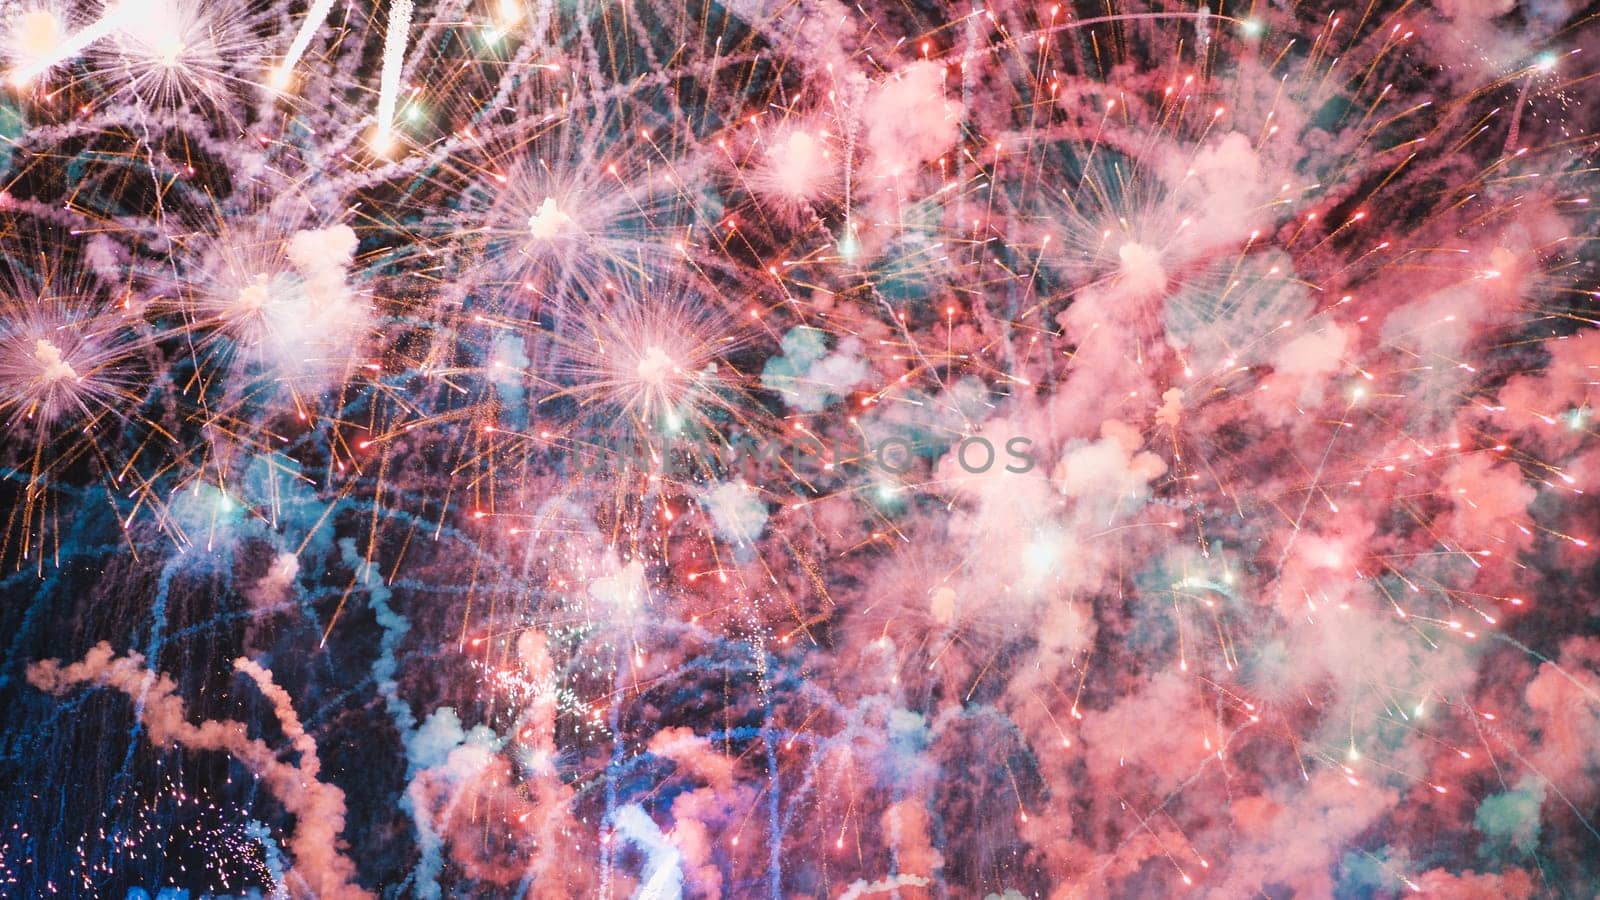 A colourful explosion of fireworks in the night sky